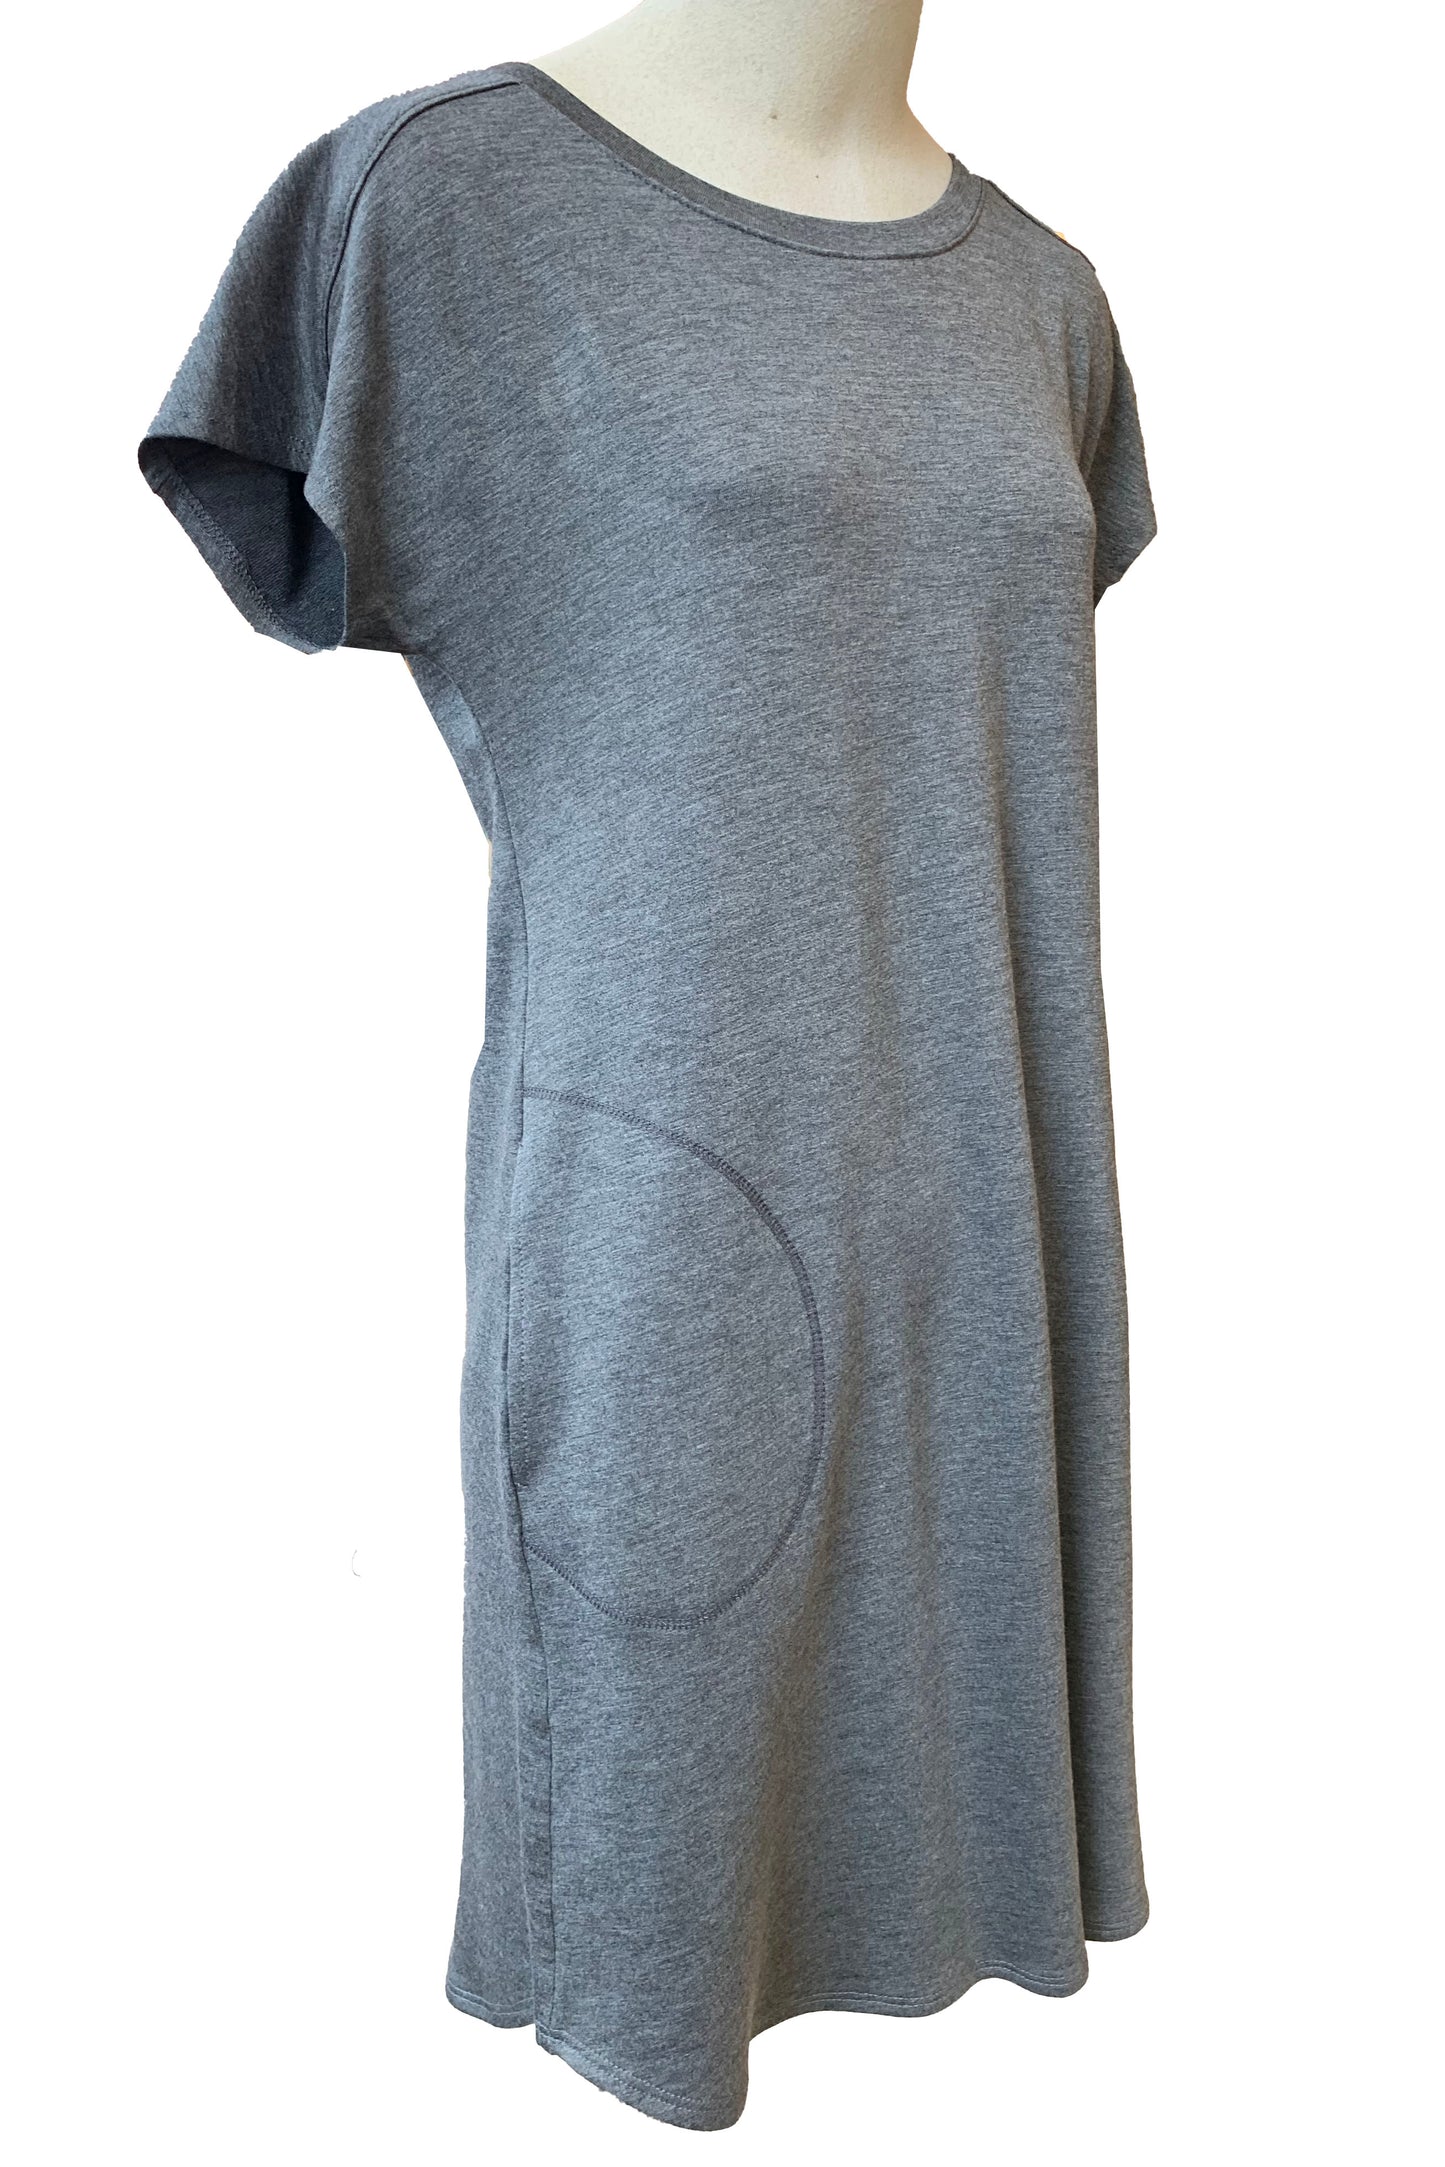 Calista Dress by Pure Essence, Charcoal, t-shirt dress, round neck, short extended sleeves, A-line shape, rounded pockets, above the the knee, made in Canada